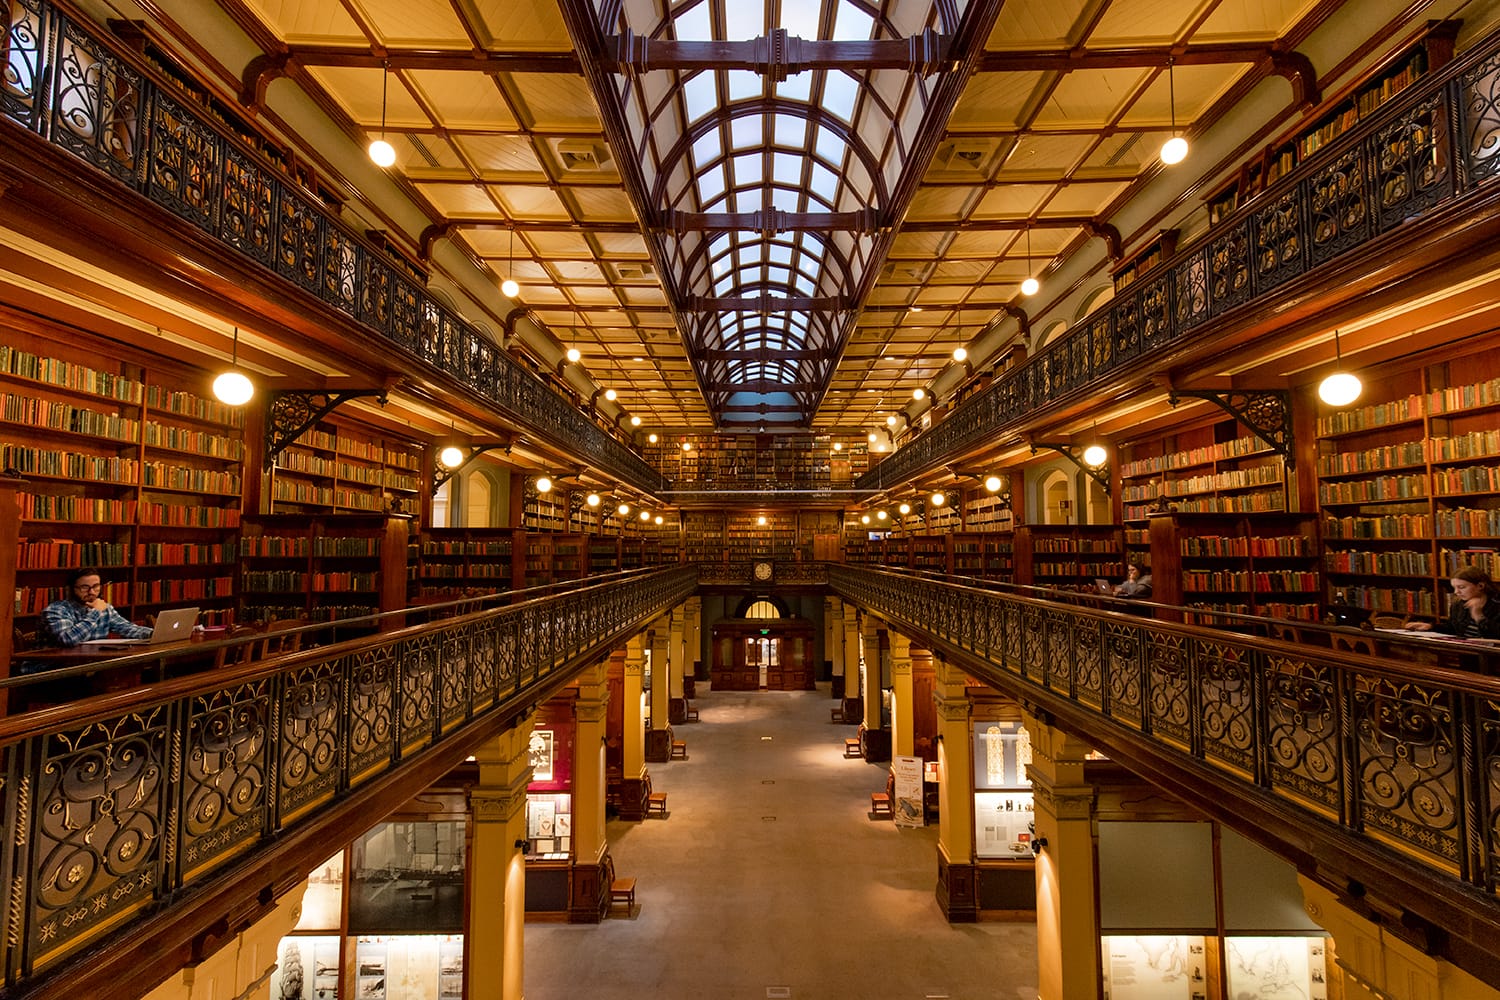 Mortlock Wing view at State Library of South Australia in Adelaide, Australia